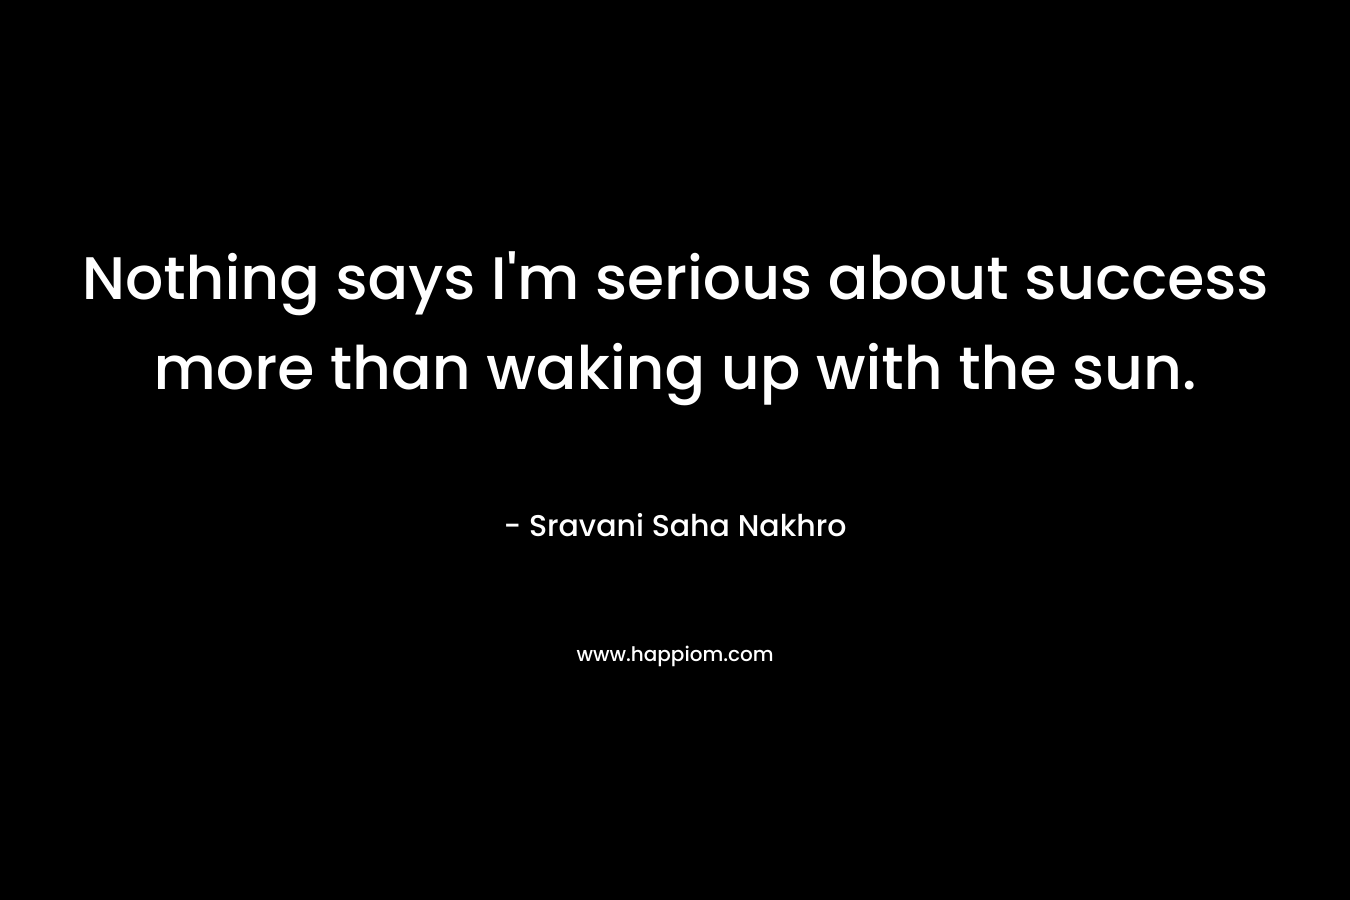 Nothing says I'm serious about success more than waking up with the sun.